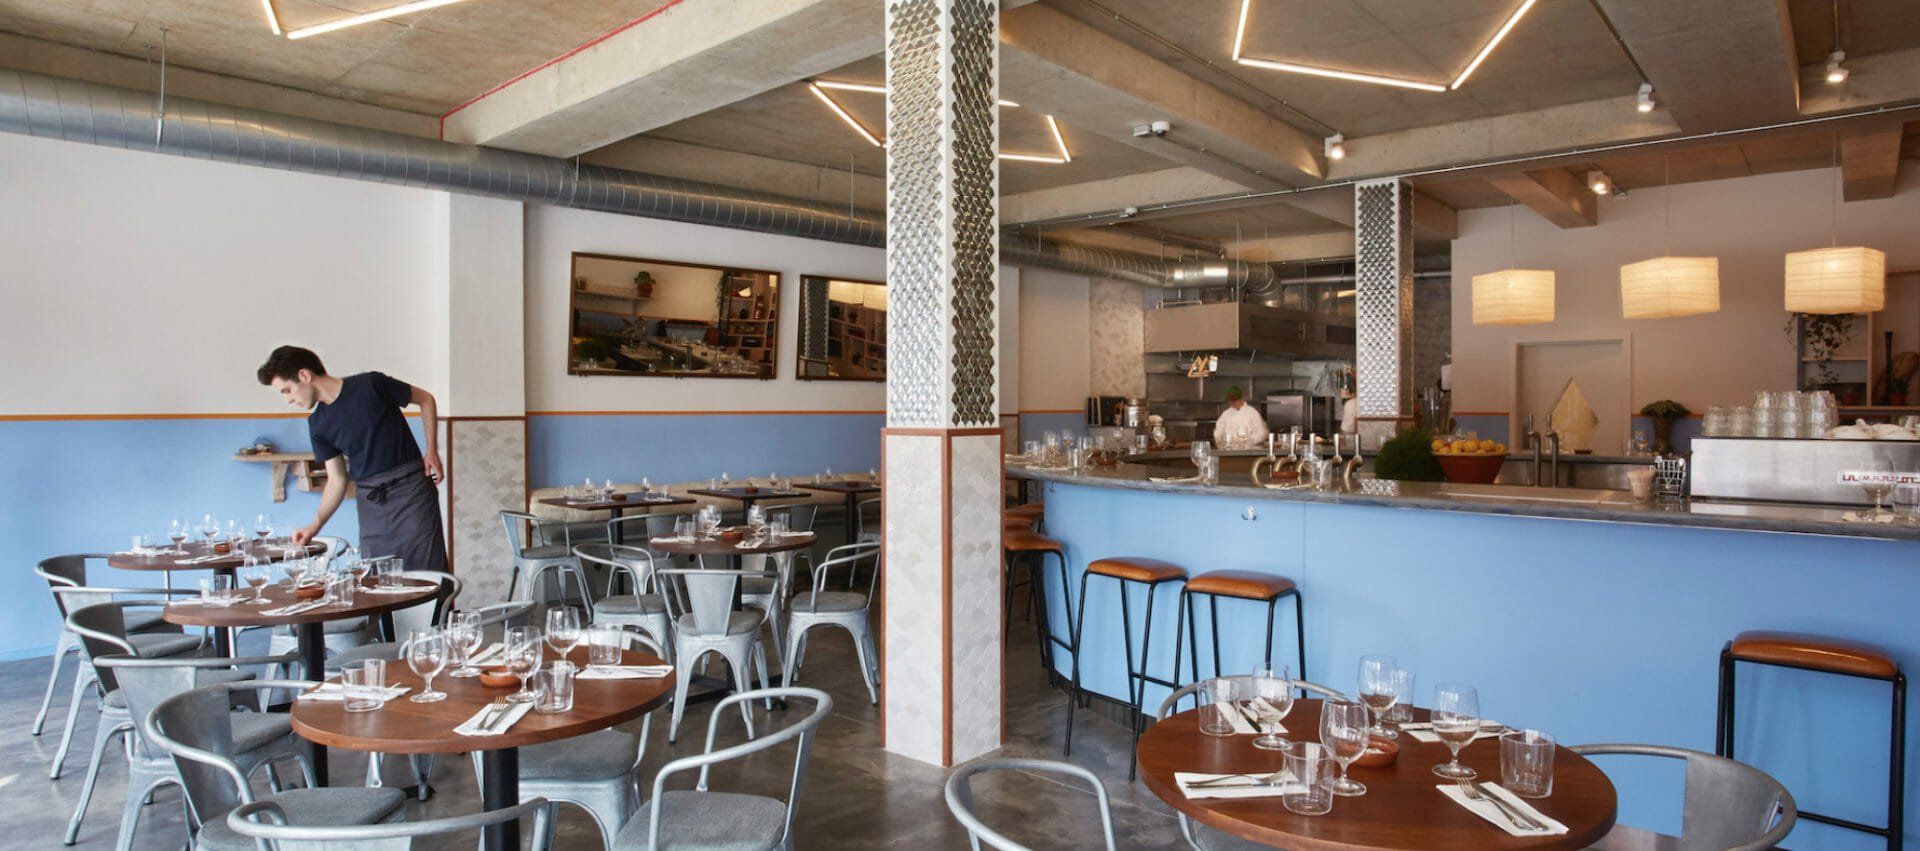 Best Restaurants In East London | Handpicked By The Nudge